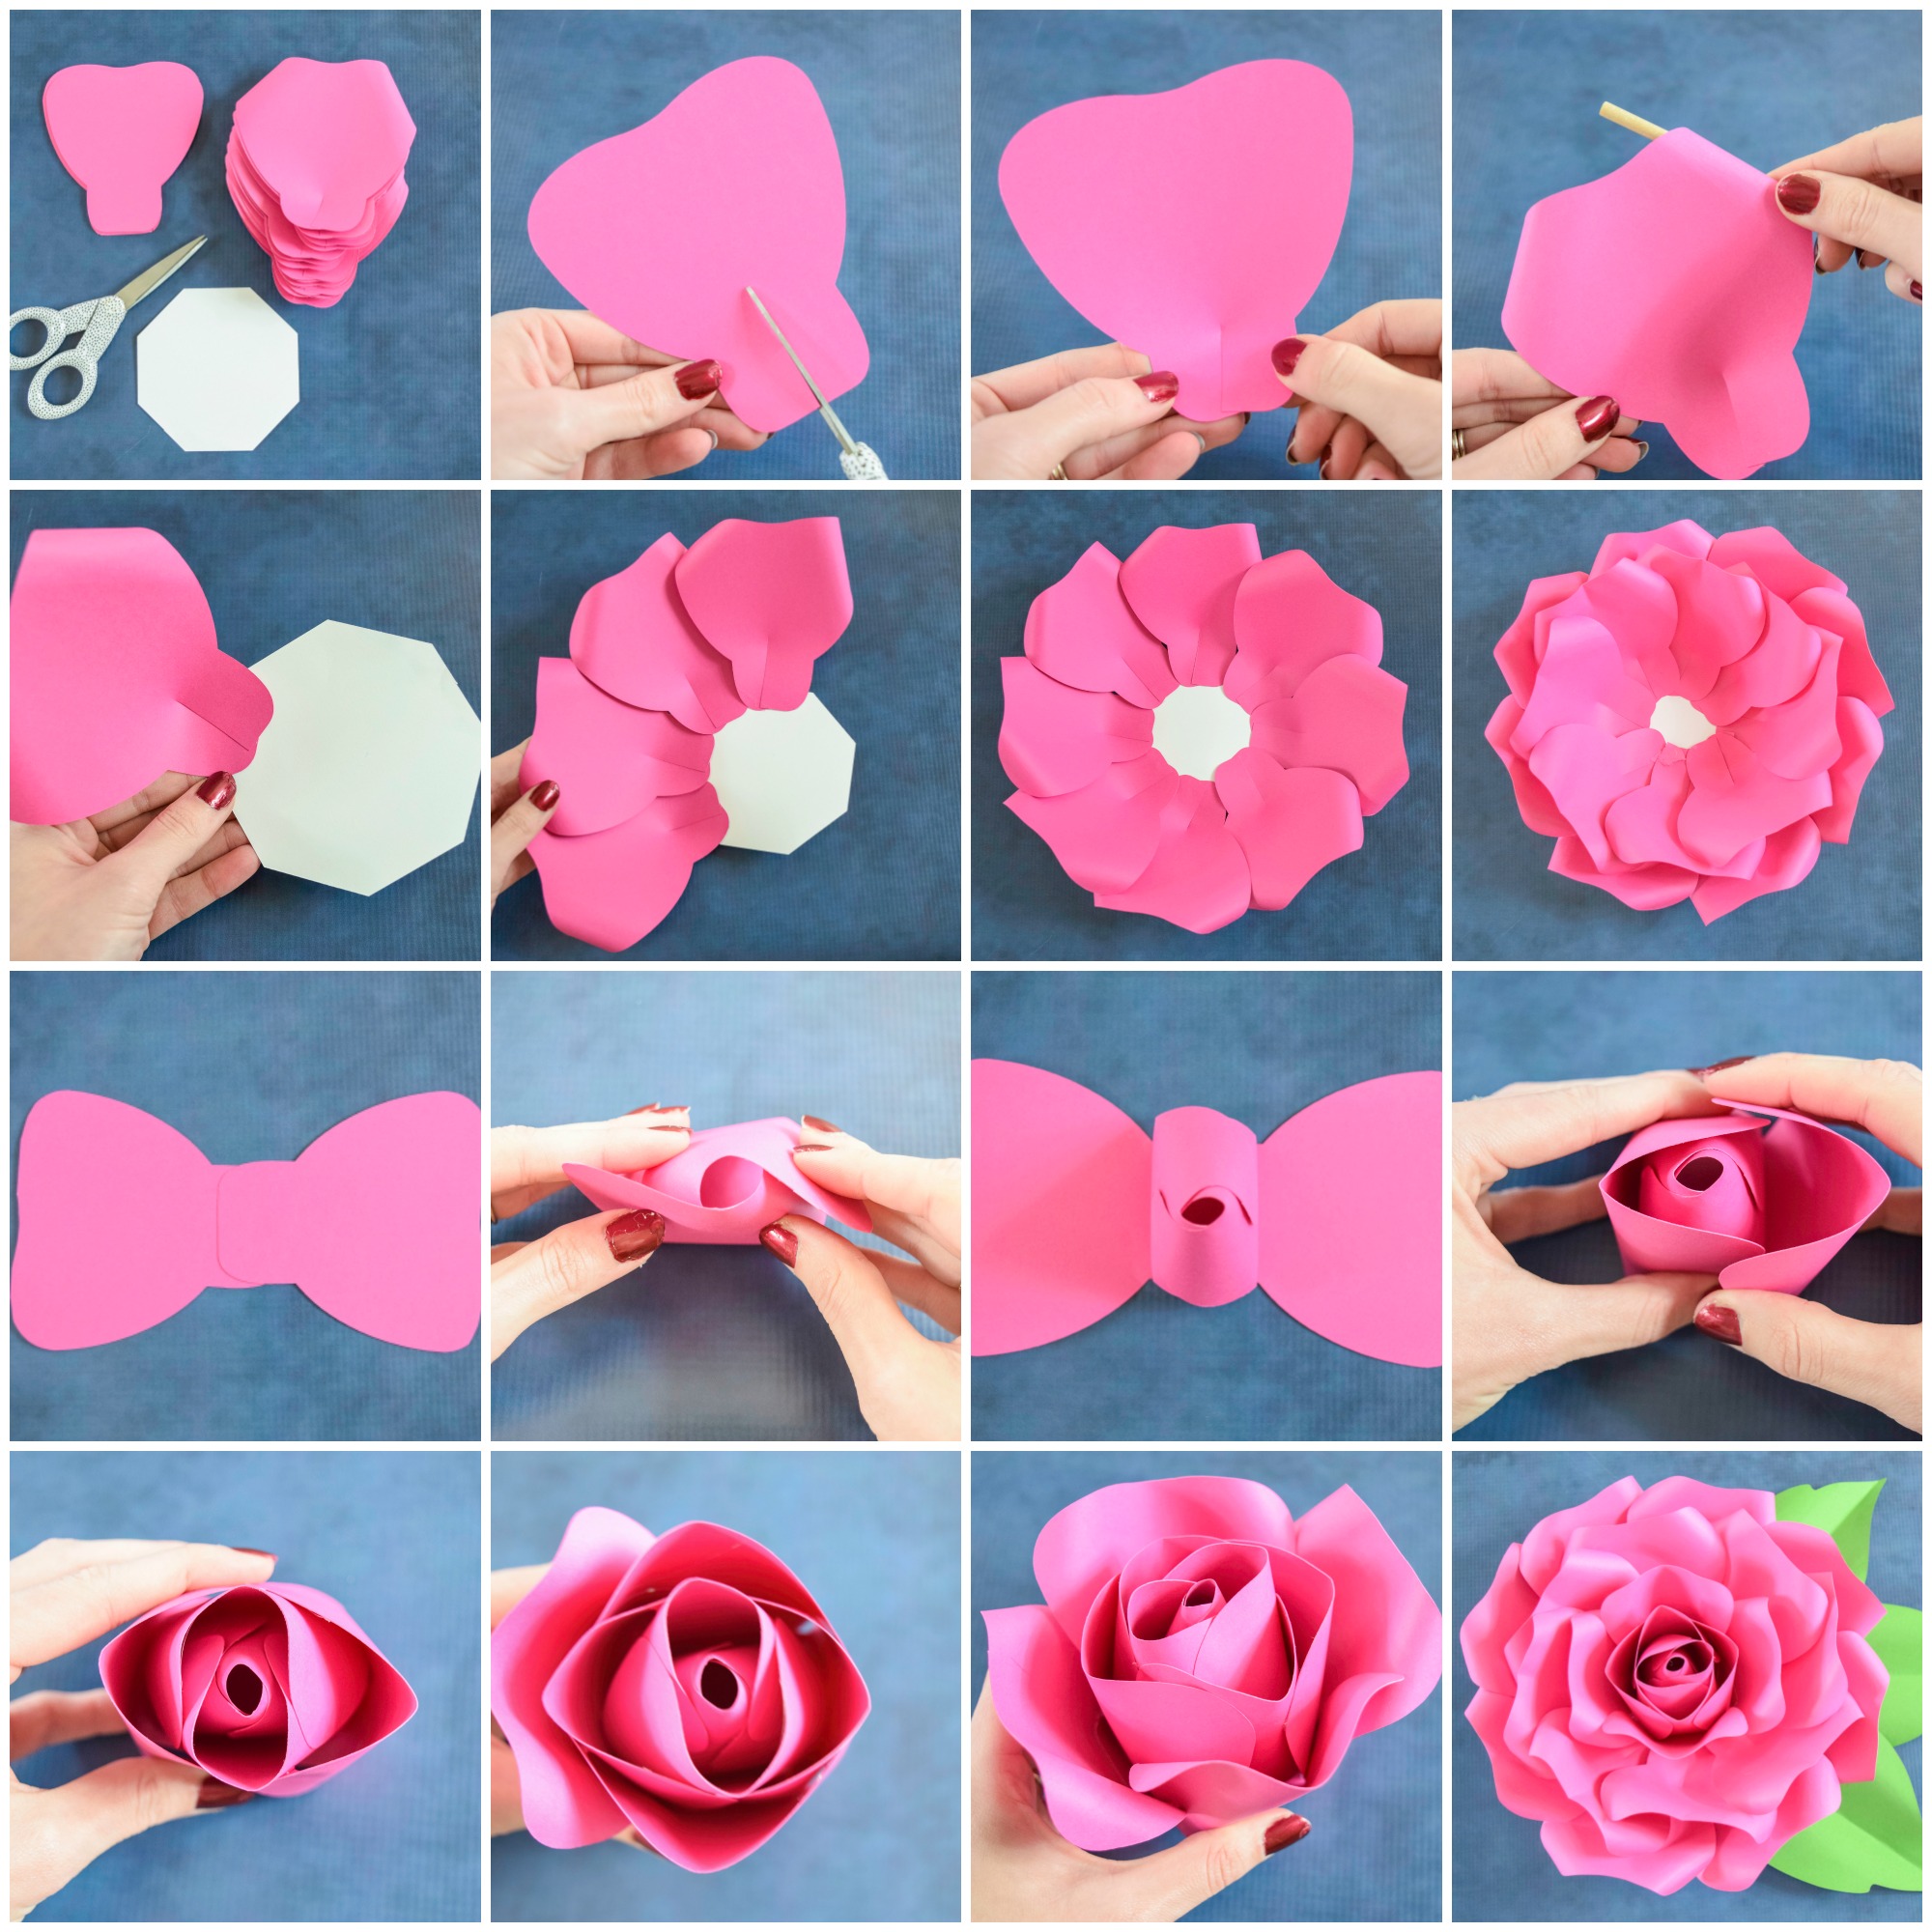 How To Make A Easy Pop Up Card Flowers Rose Paper Cra - vrogue.co